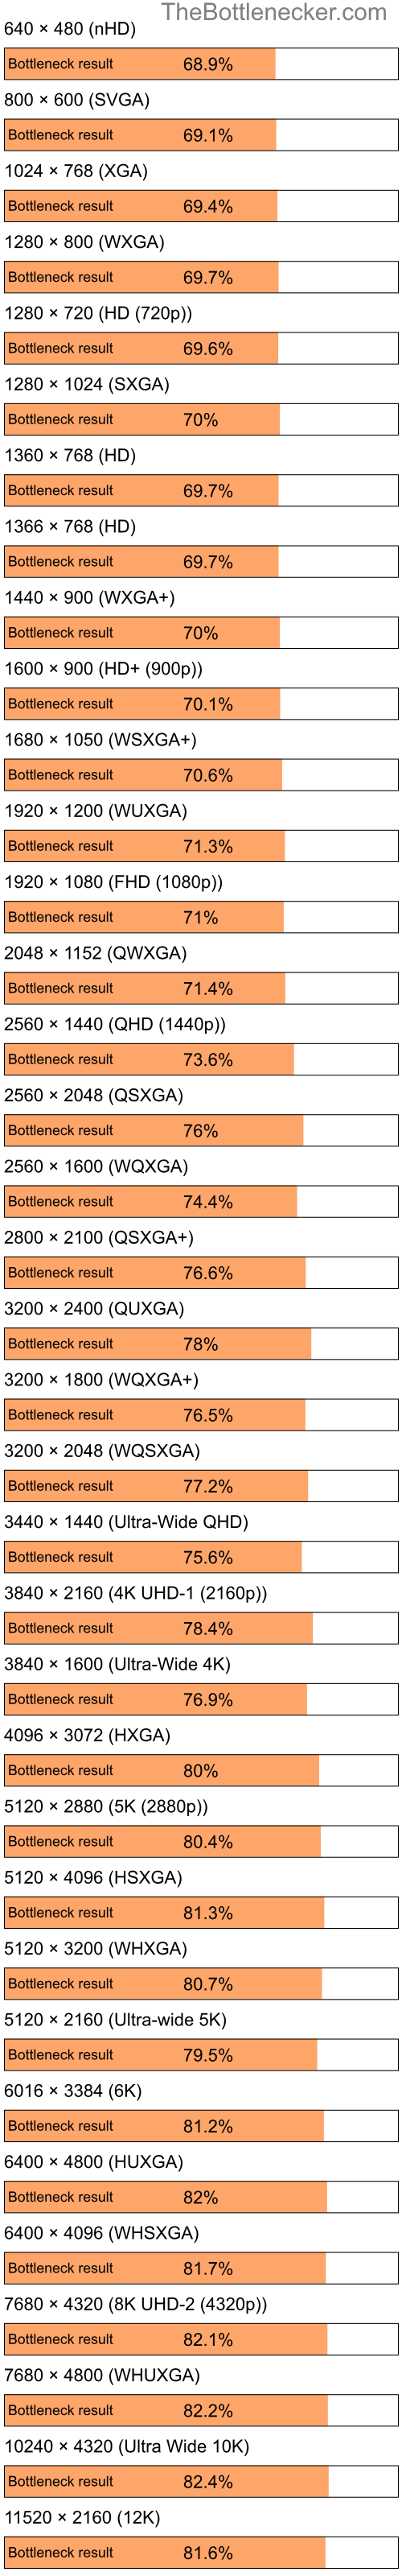 Bottleneck results by resolution for Intel Celeron M 410 and AMD M880G with Mobility Radeon HD 4250 in Graphic Card Intense Tasks